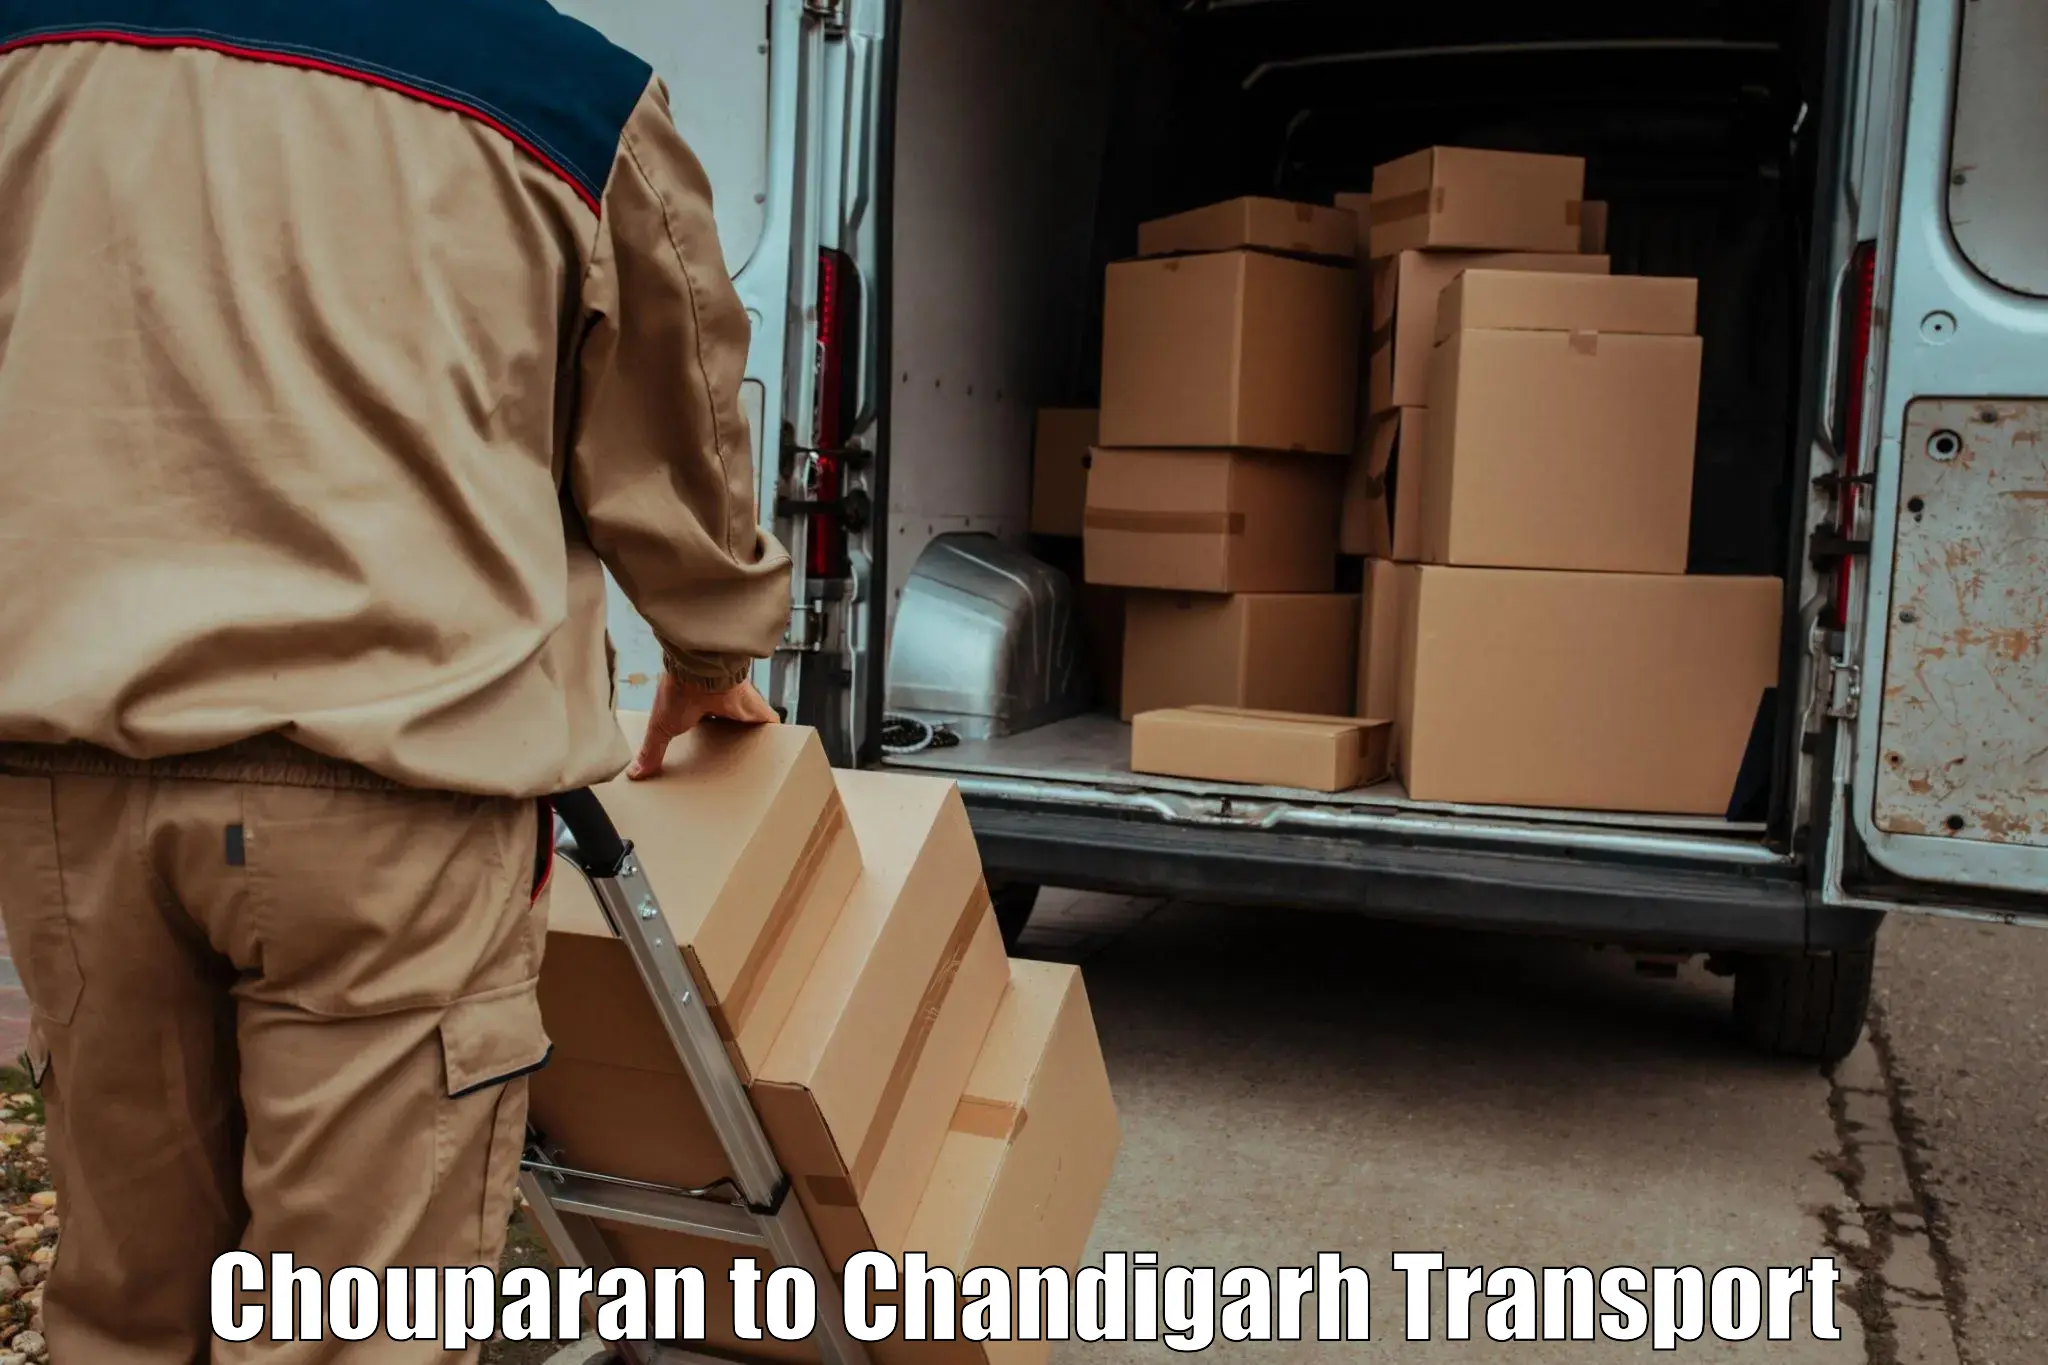 Road transport online services Chouparan to Chandigarh